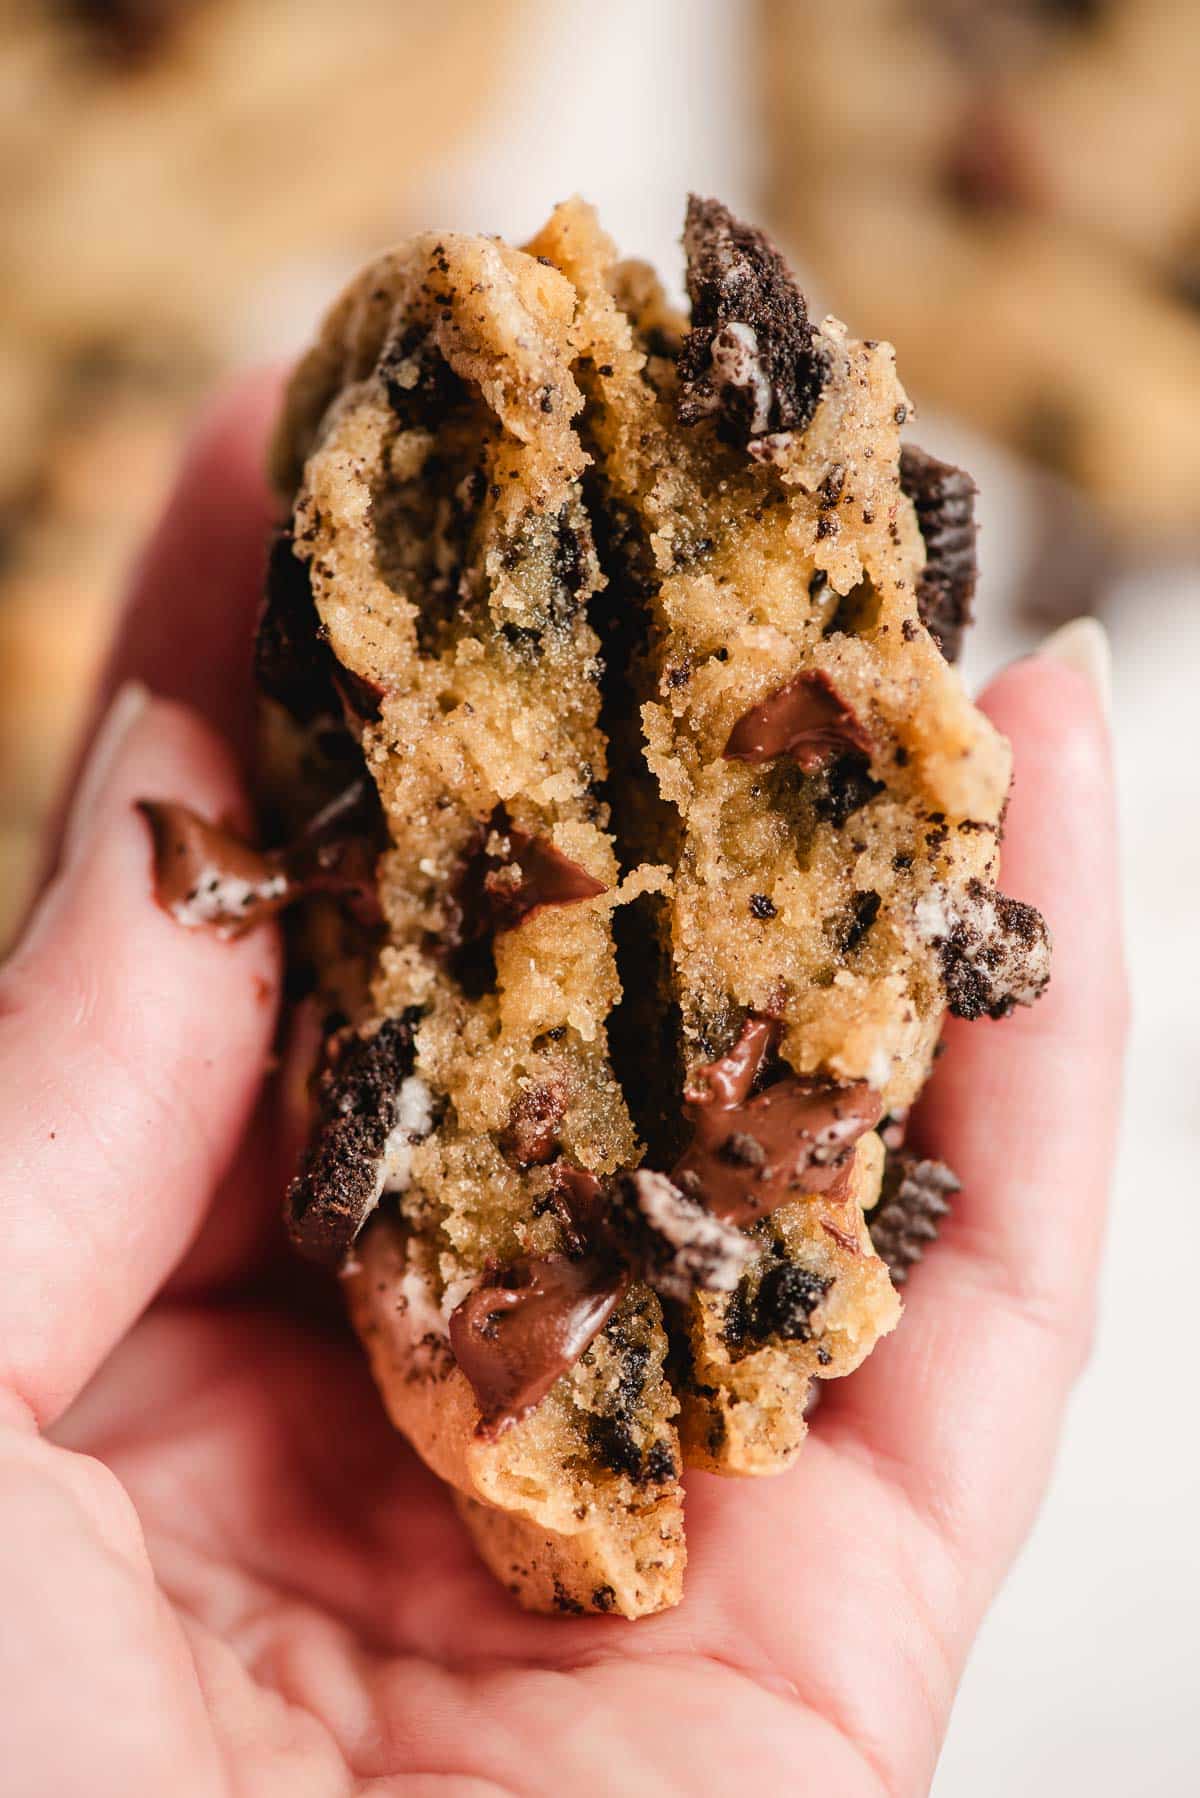 Oreo chocolate chip cookie split in half to show the melty chocolate inside.